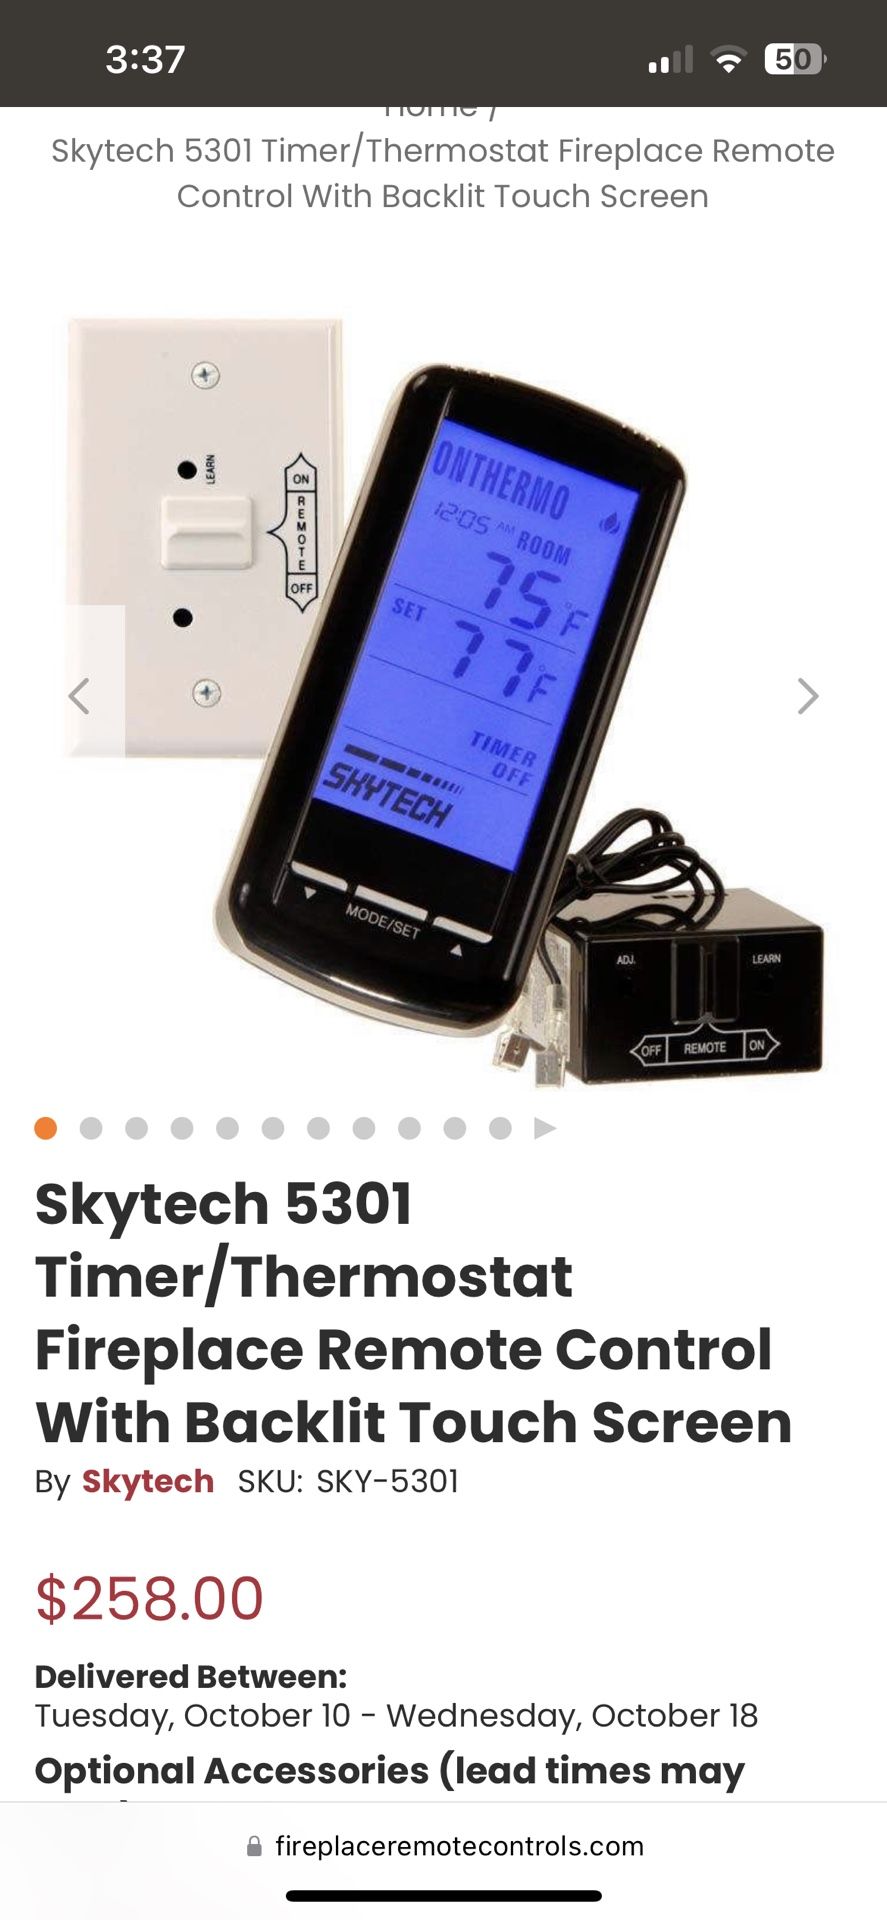 Universal fireplace remote Control